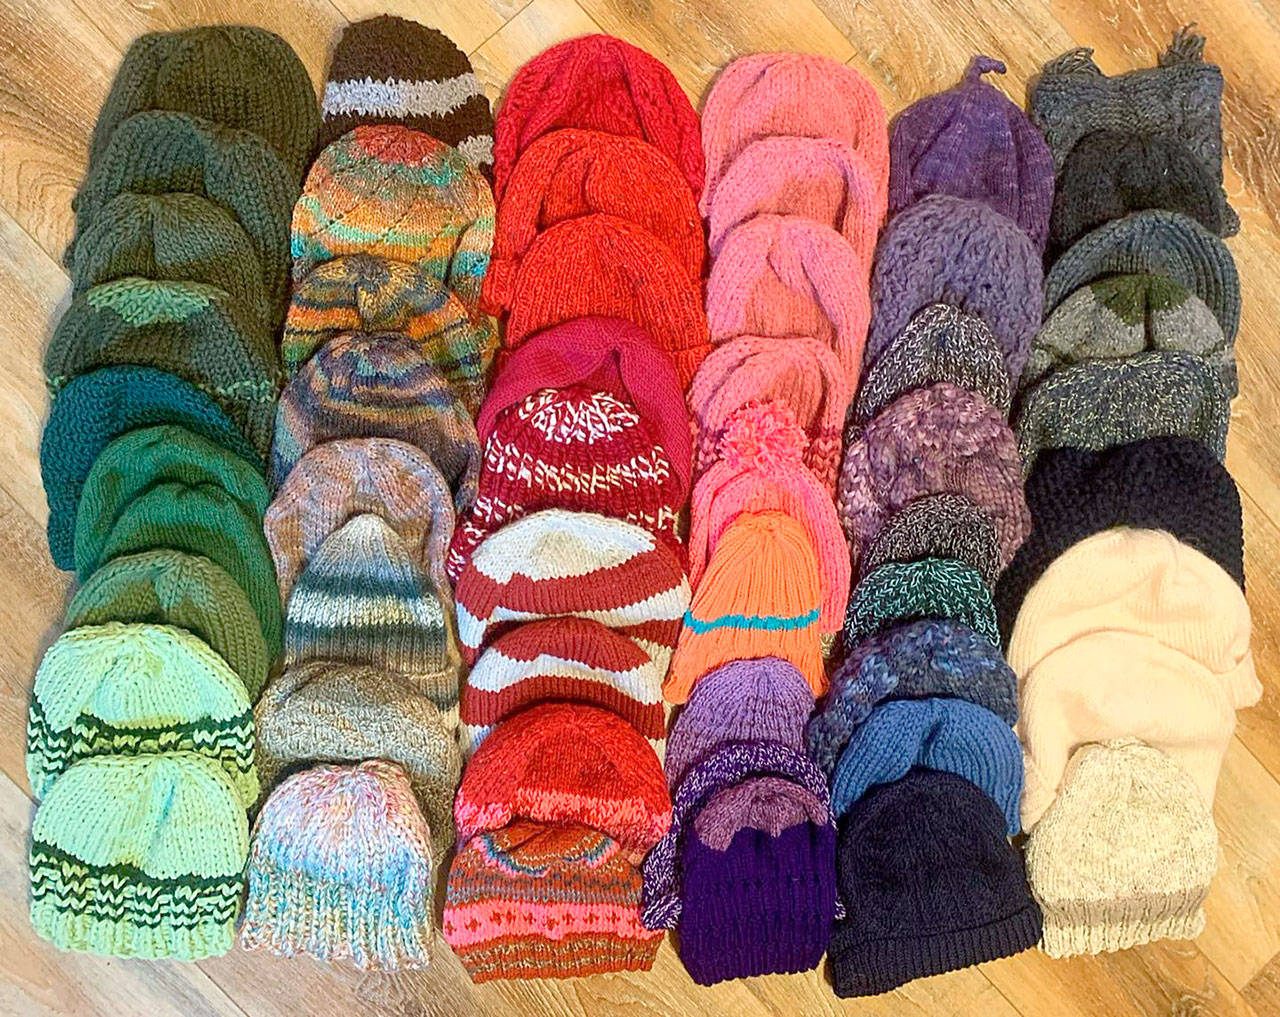 The Quilcene and Brinnon Community Knitters made 60 caps for workers of the Mason County and Jefferson County Public Utility Districts. (Photo courtesy of Lise Solvang)